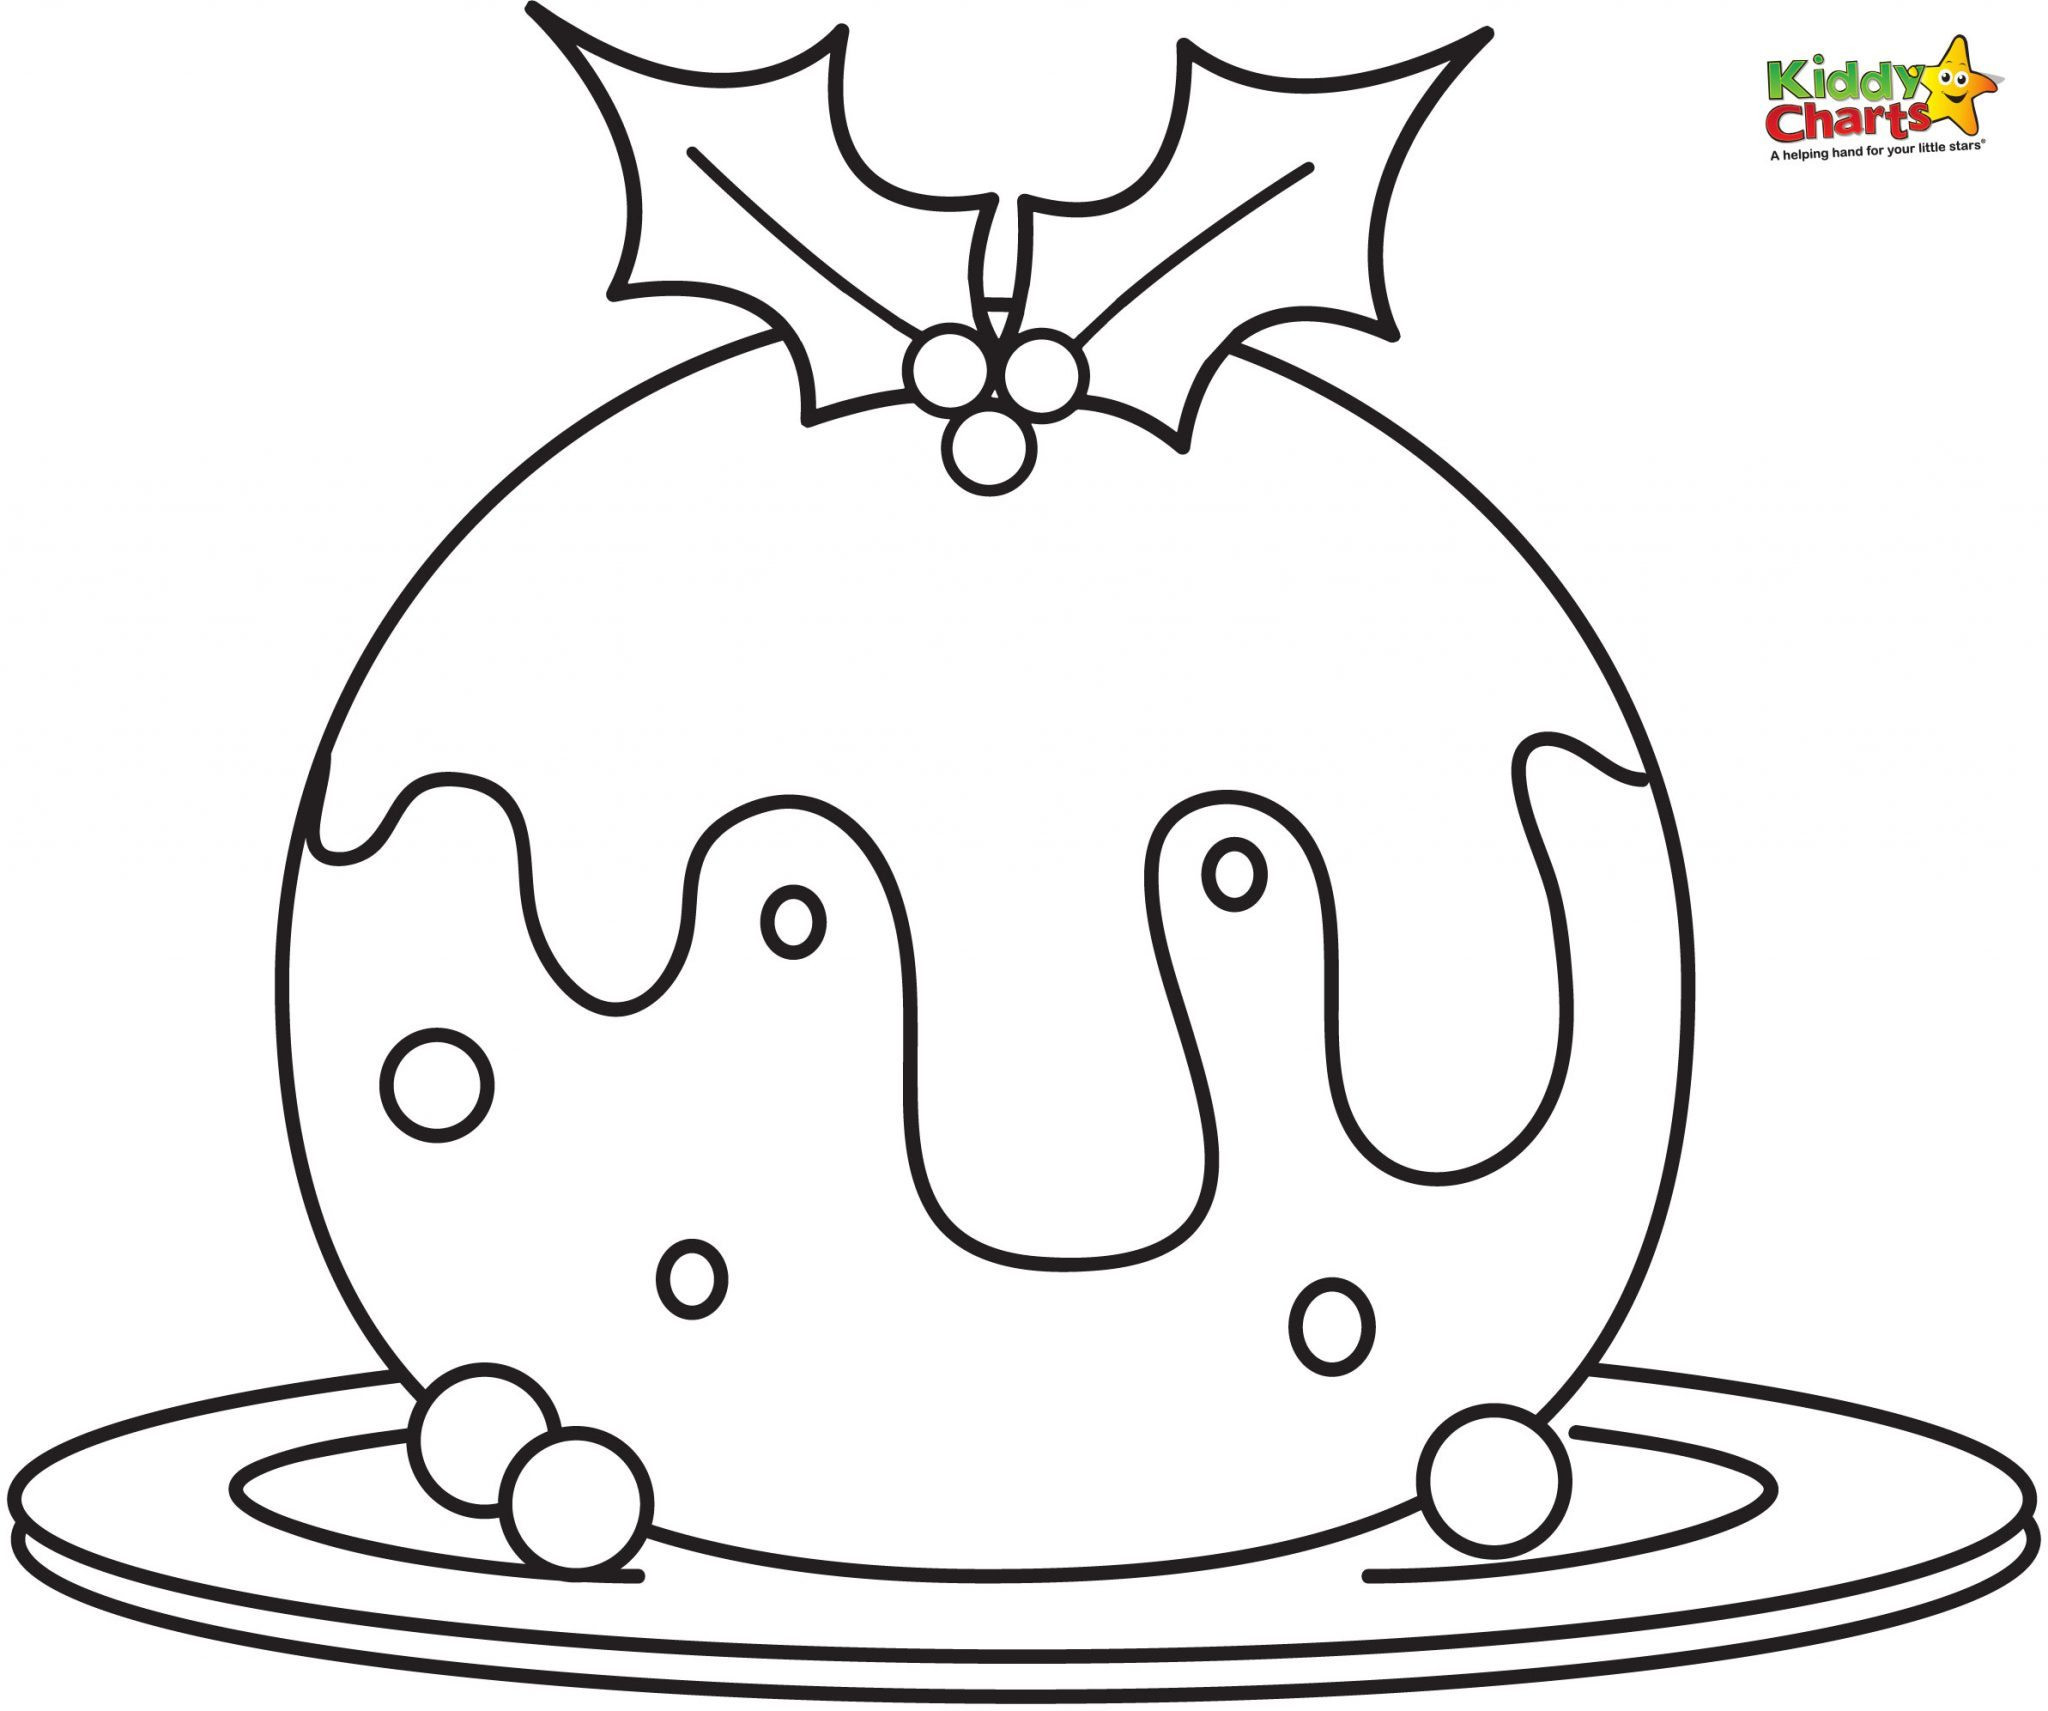 Kids Christmas Coloring Book
 Christmas Coloring Pages for Kids from Kiddycharts